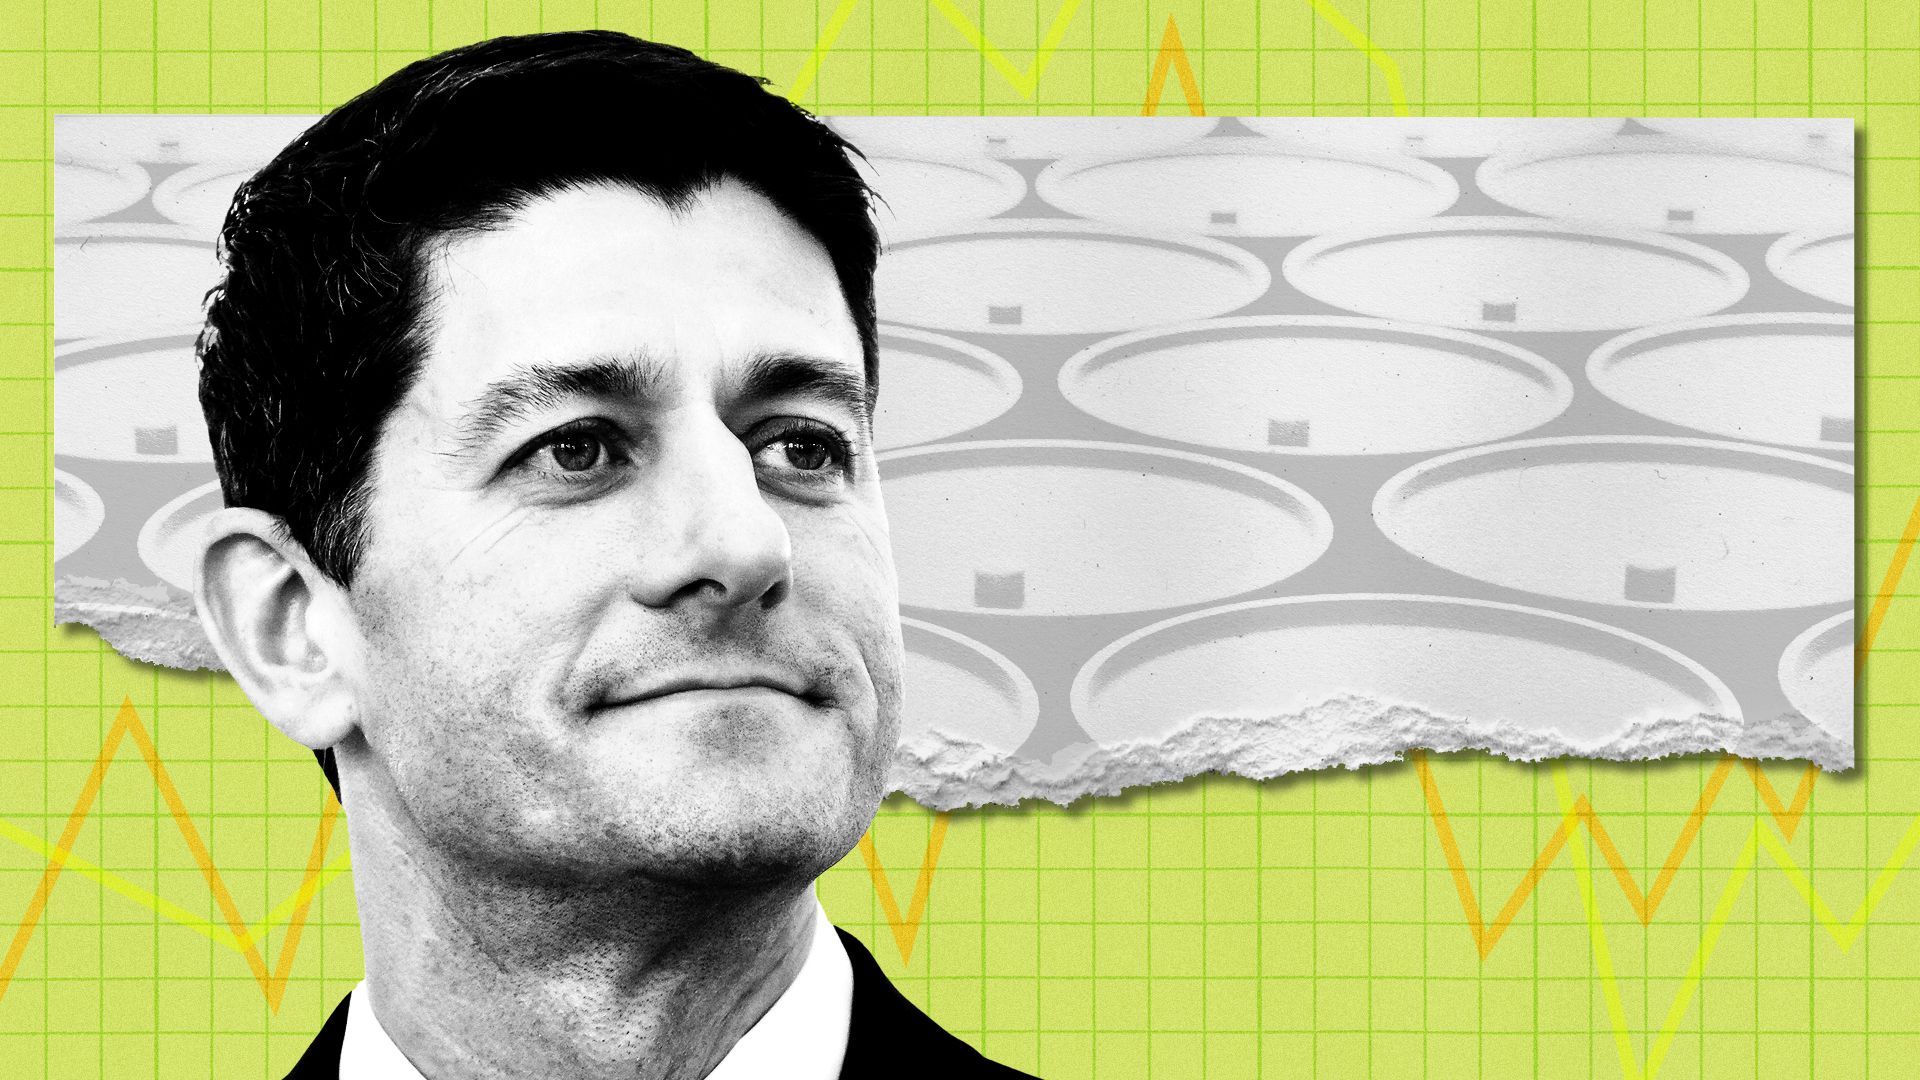 Photo illustration of Paul Ryan with a line chart and image of oil barrels 